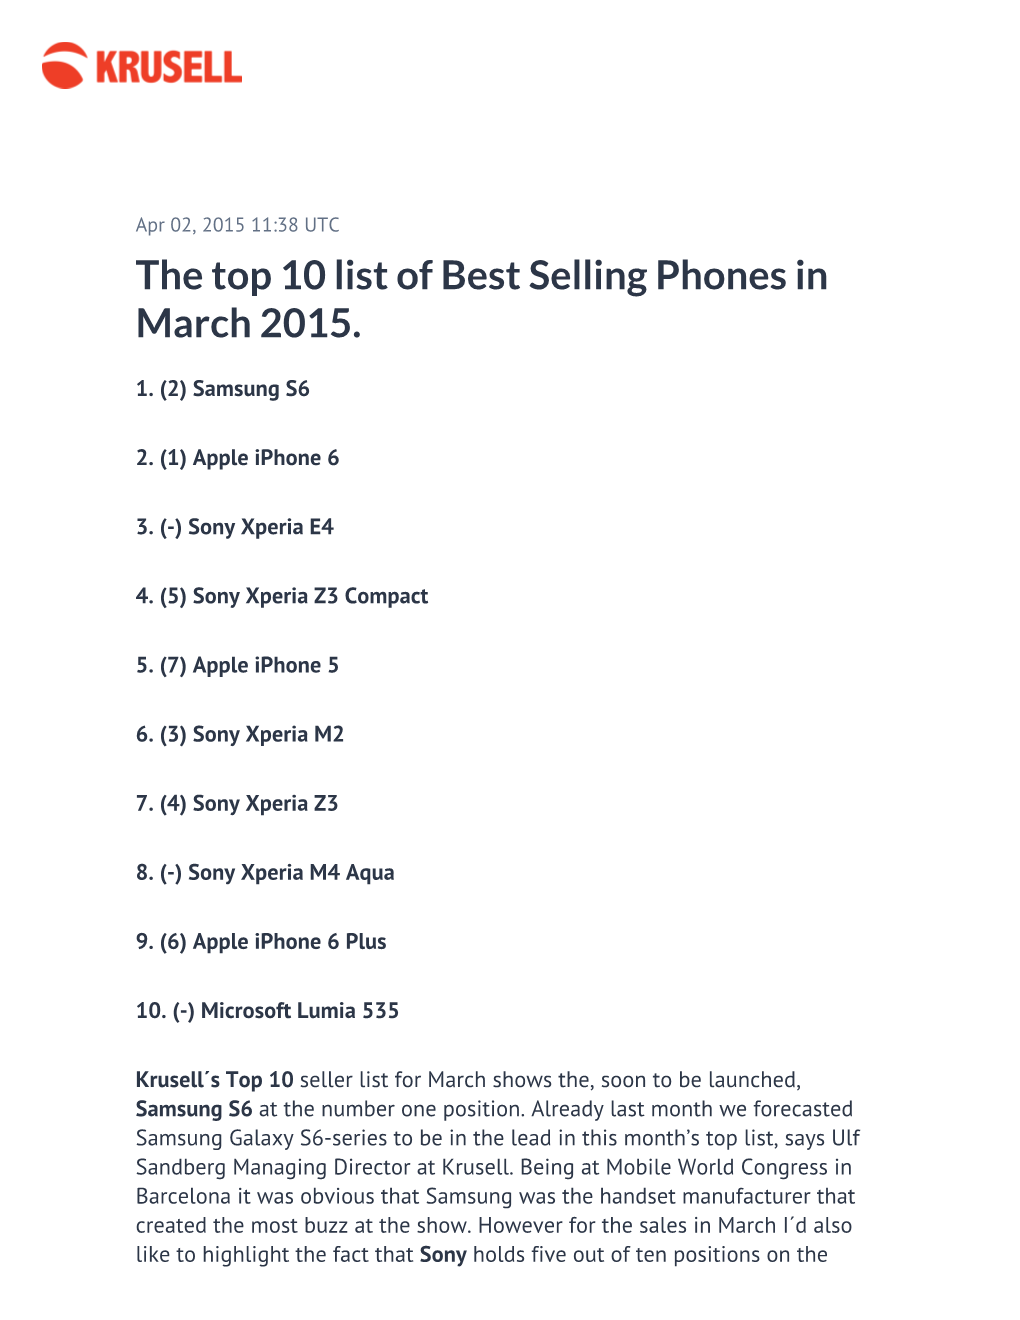 The Top 10 List of Best Selling Phones in March 2015